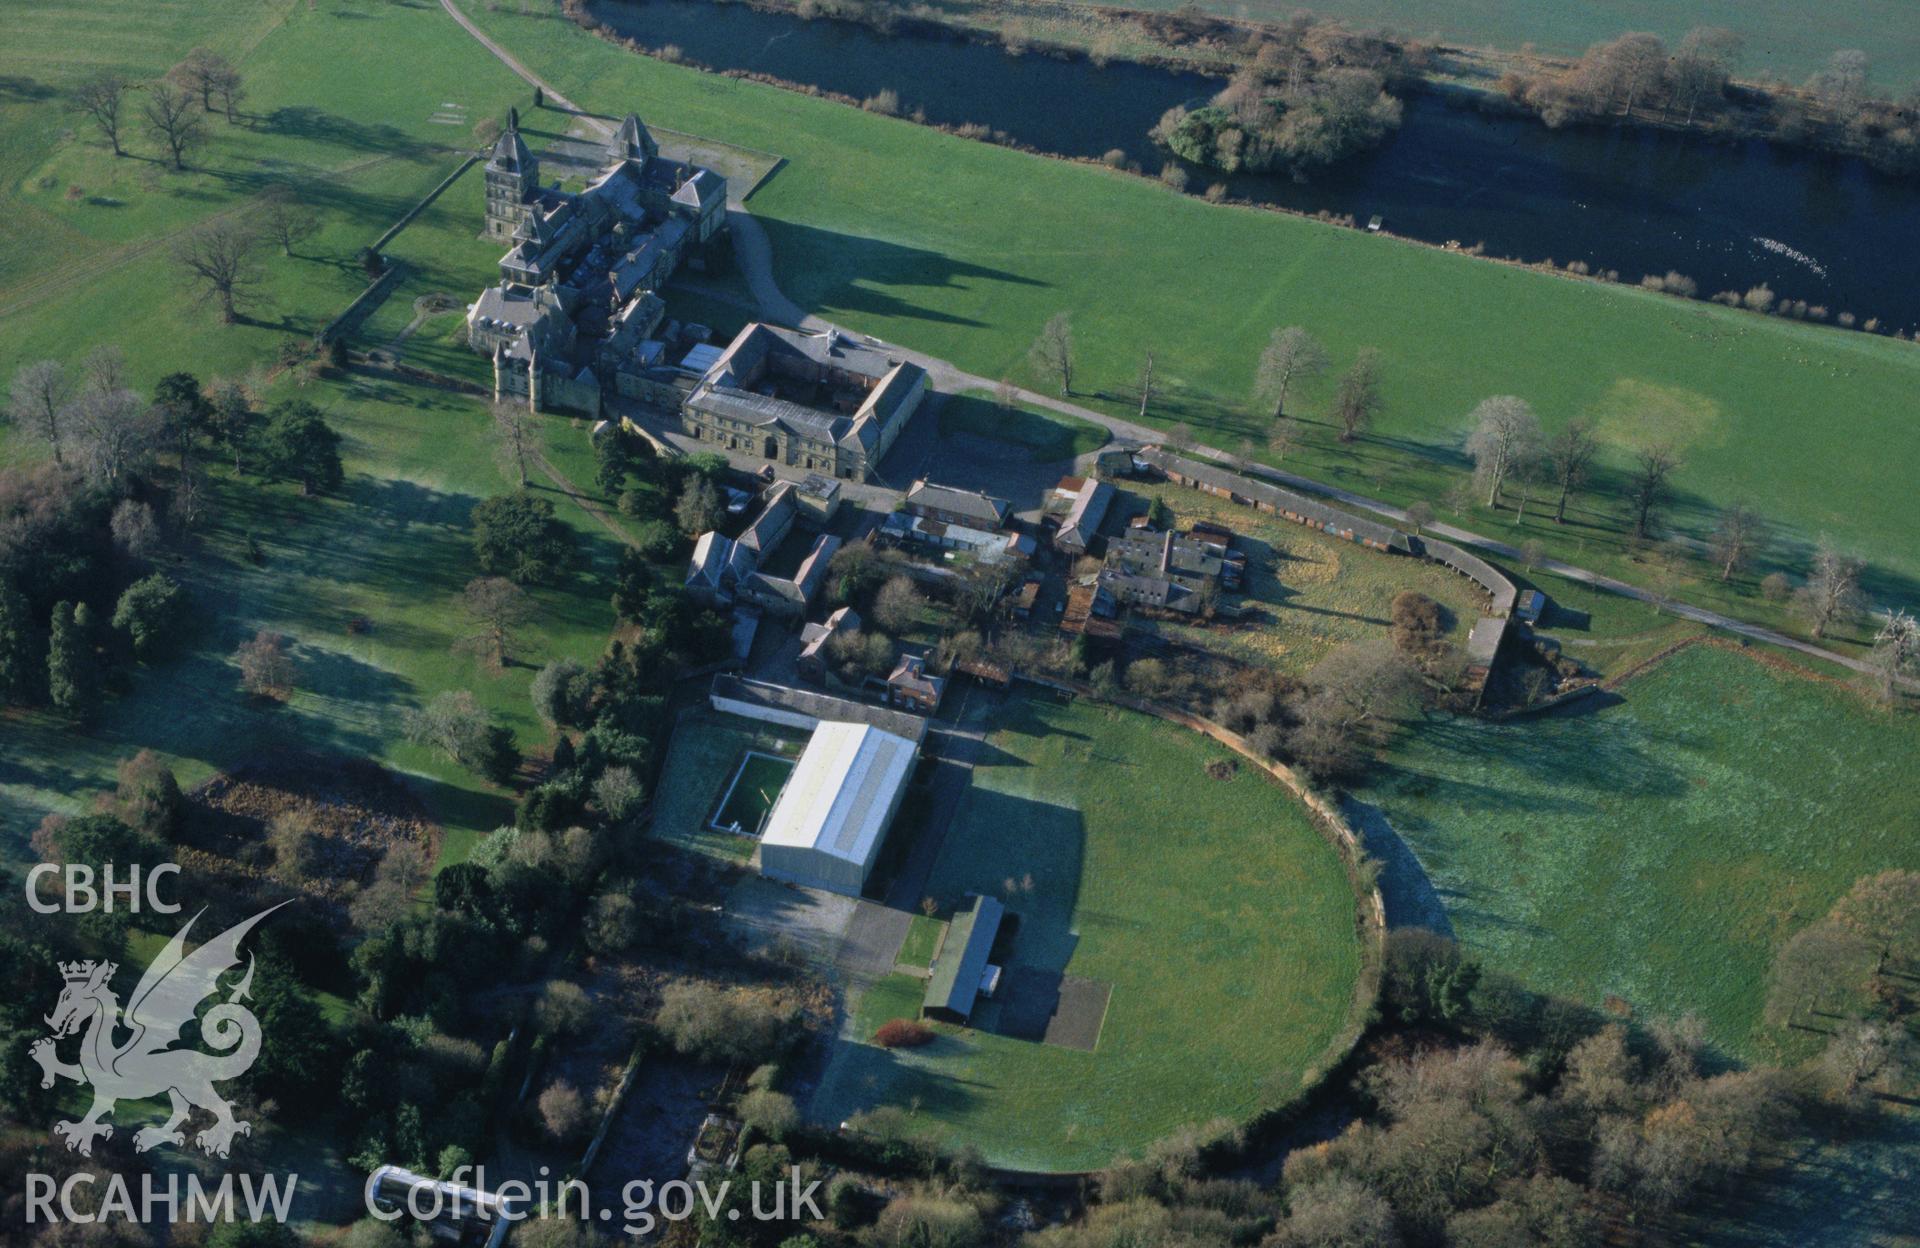 Slide of RCAHMW colour oblique aerial photograph of Wynnstay Park, taken by C.R. Musson, 22/12/1996.